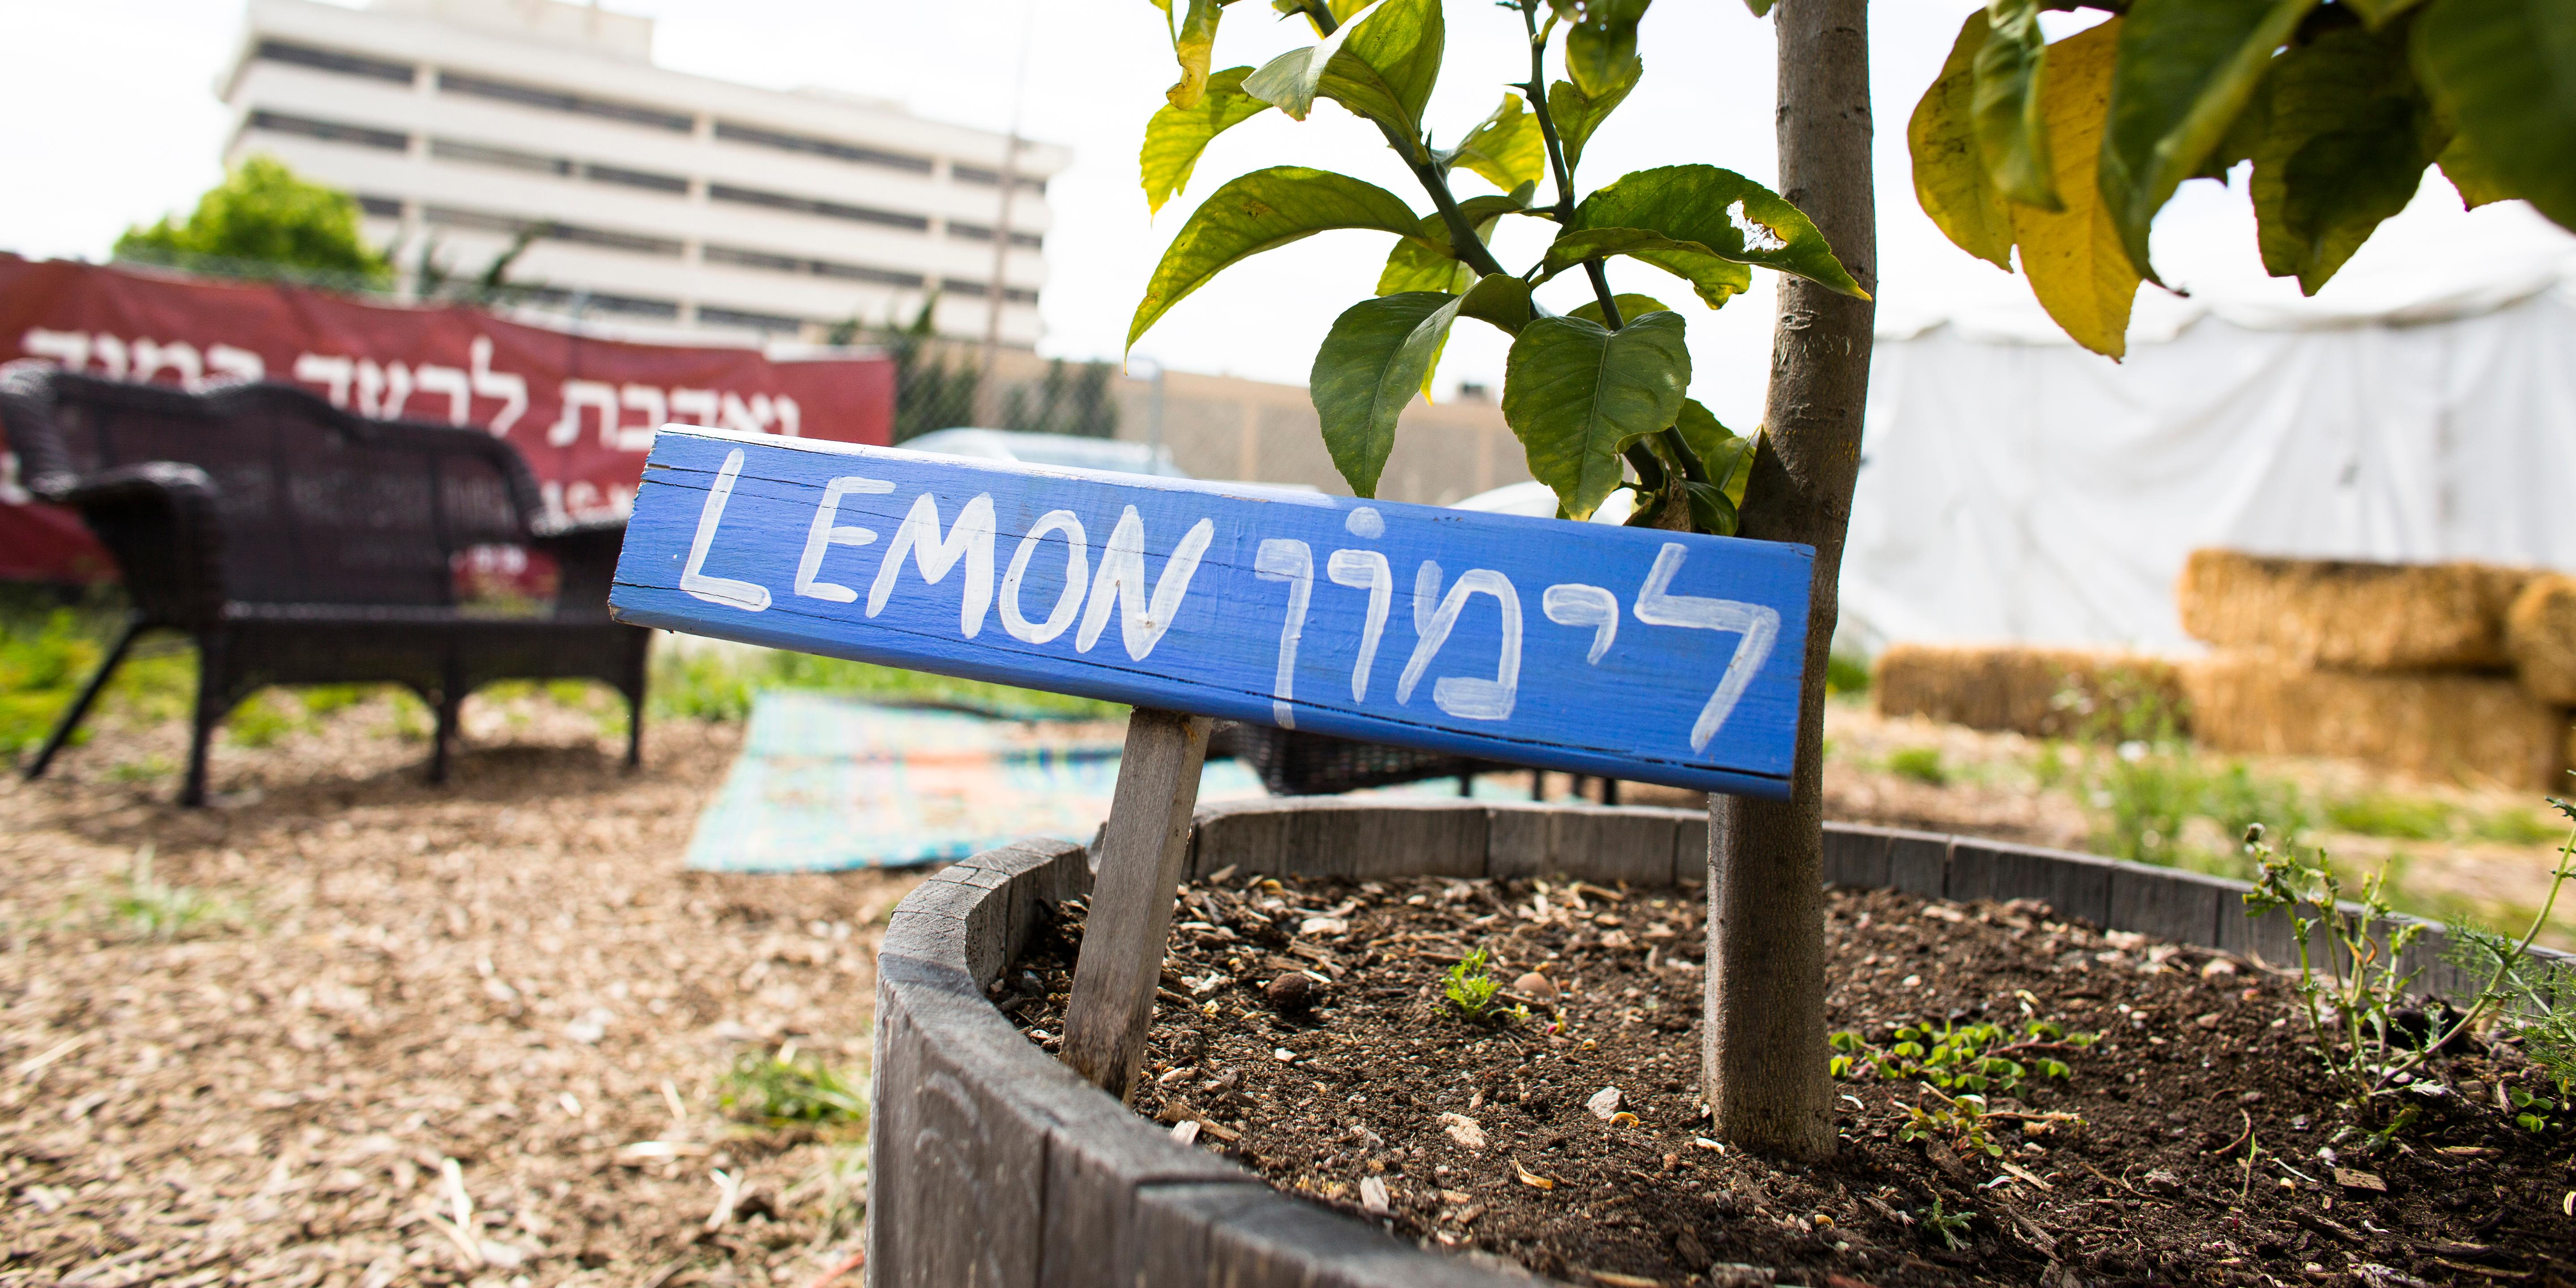 Lemon tree with sign translated in a different language